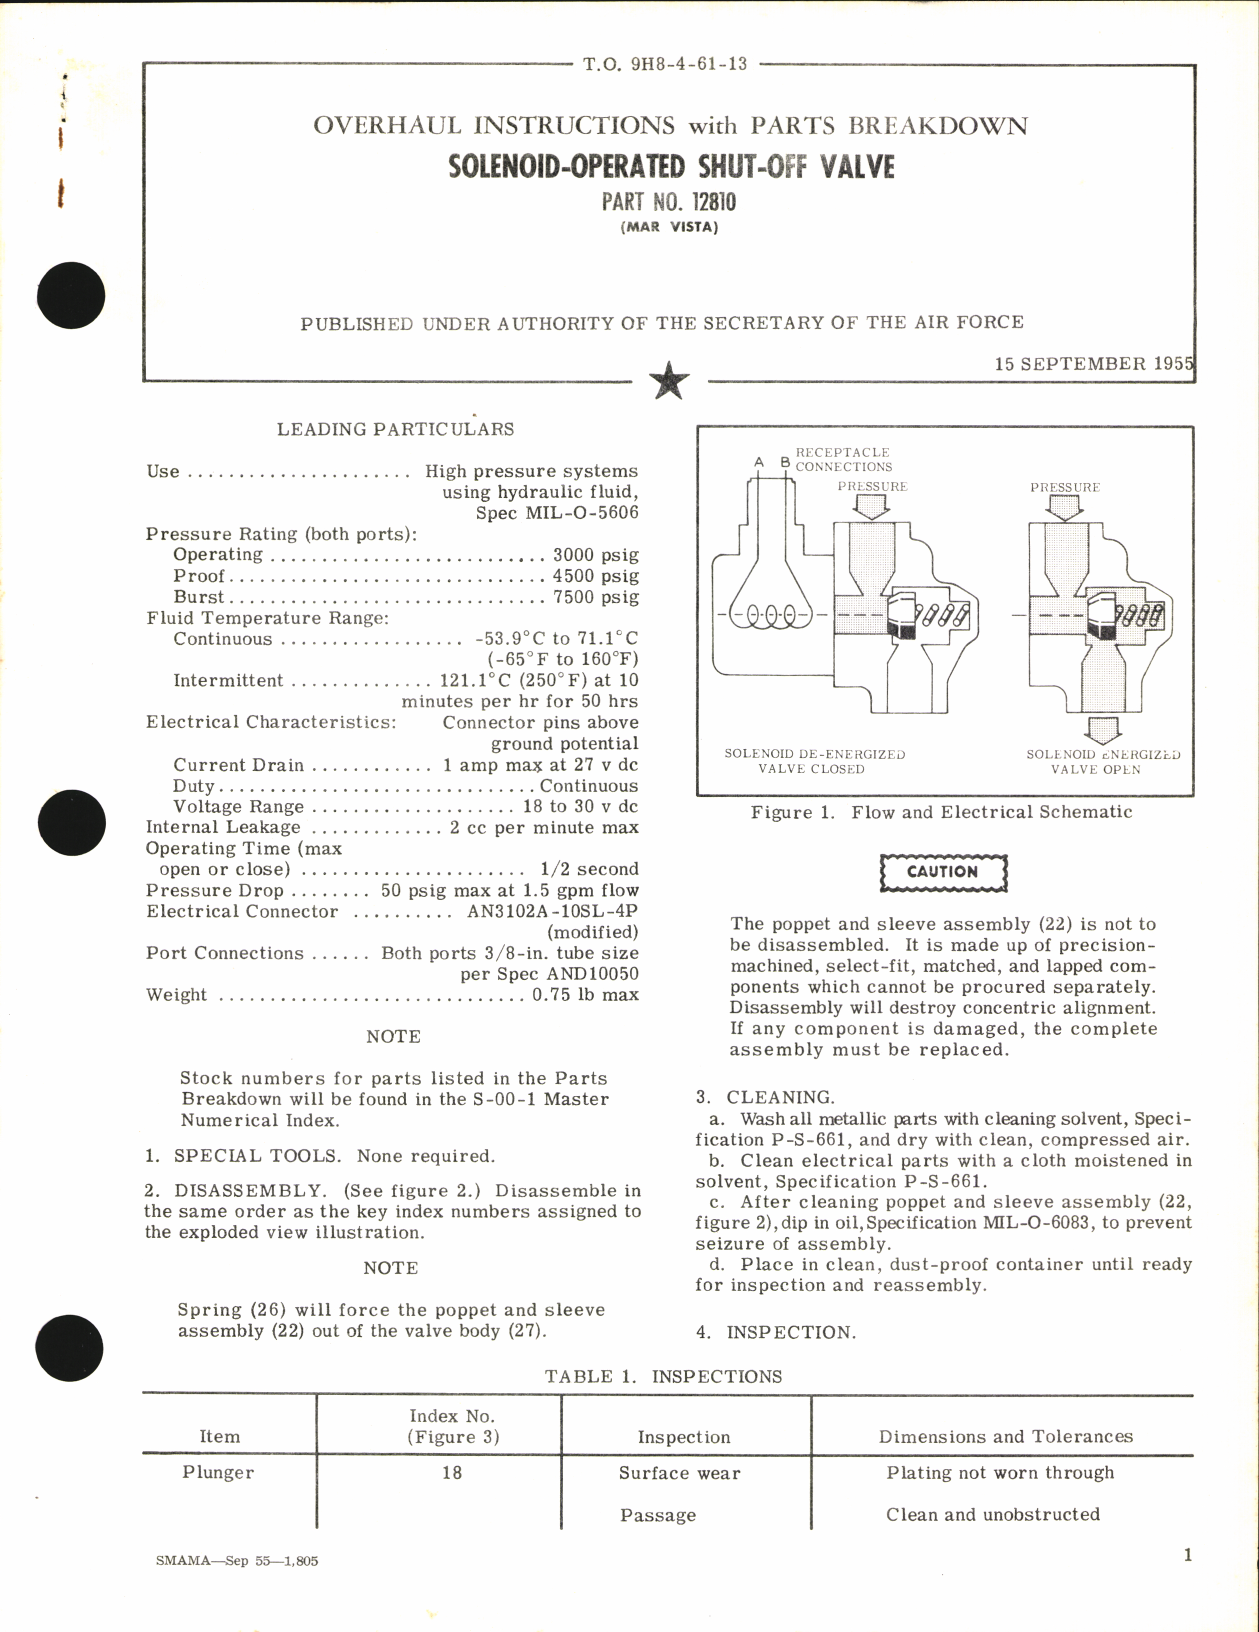 Sample page 1 from AirCorps Library document: Overhaul Instructions with Parts Breakdown for Solenoid Operated Shut-off Valve Part No. 12810